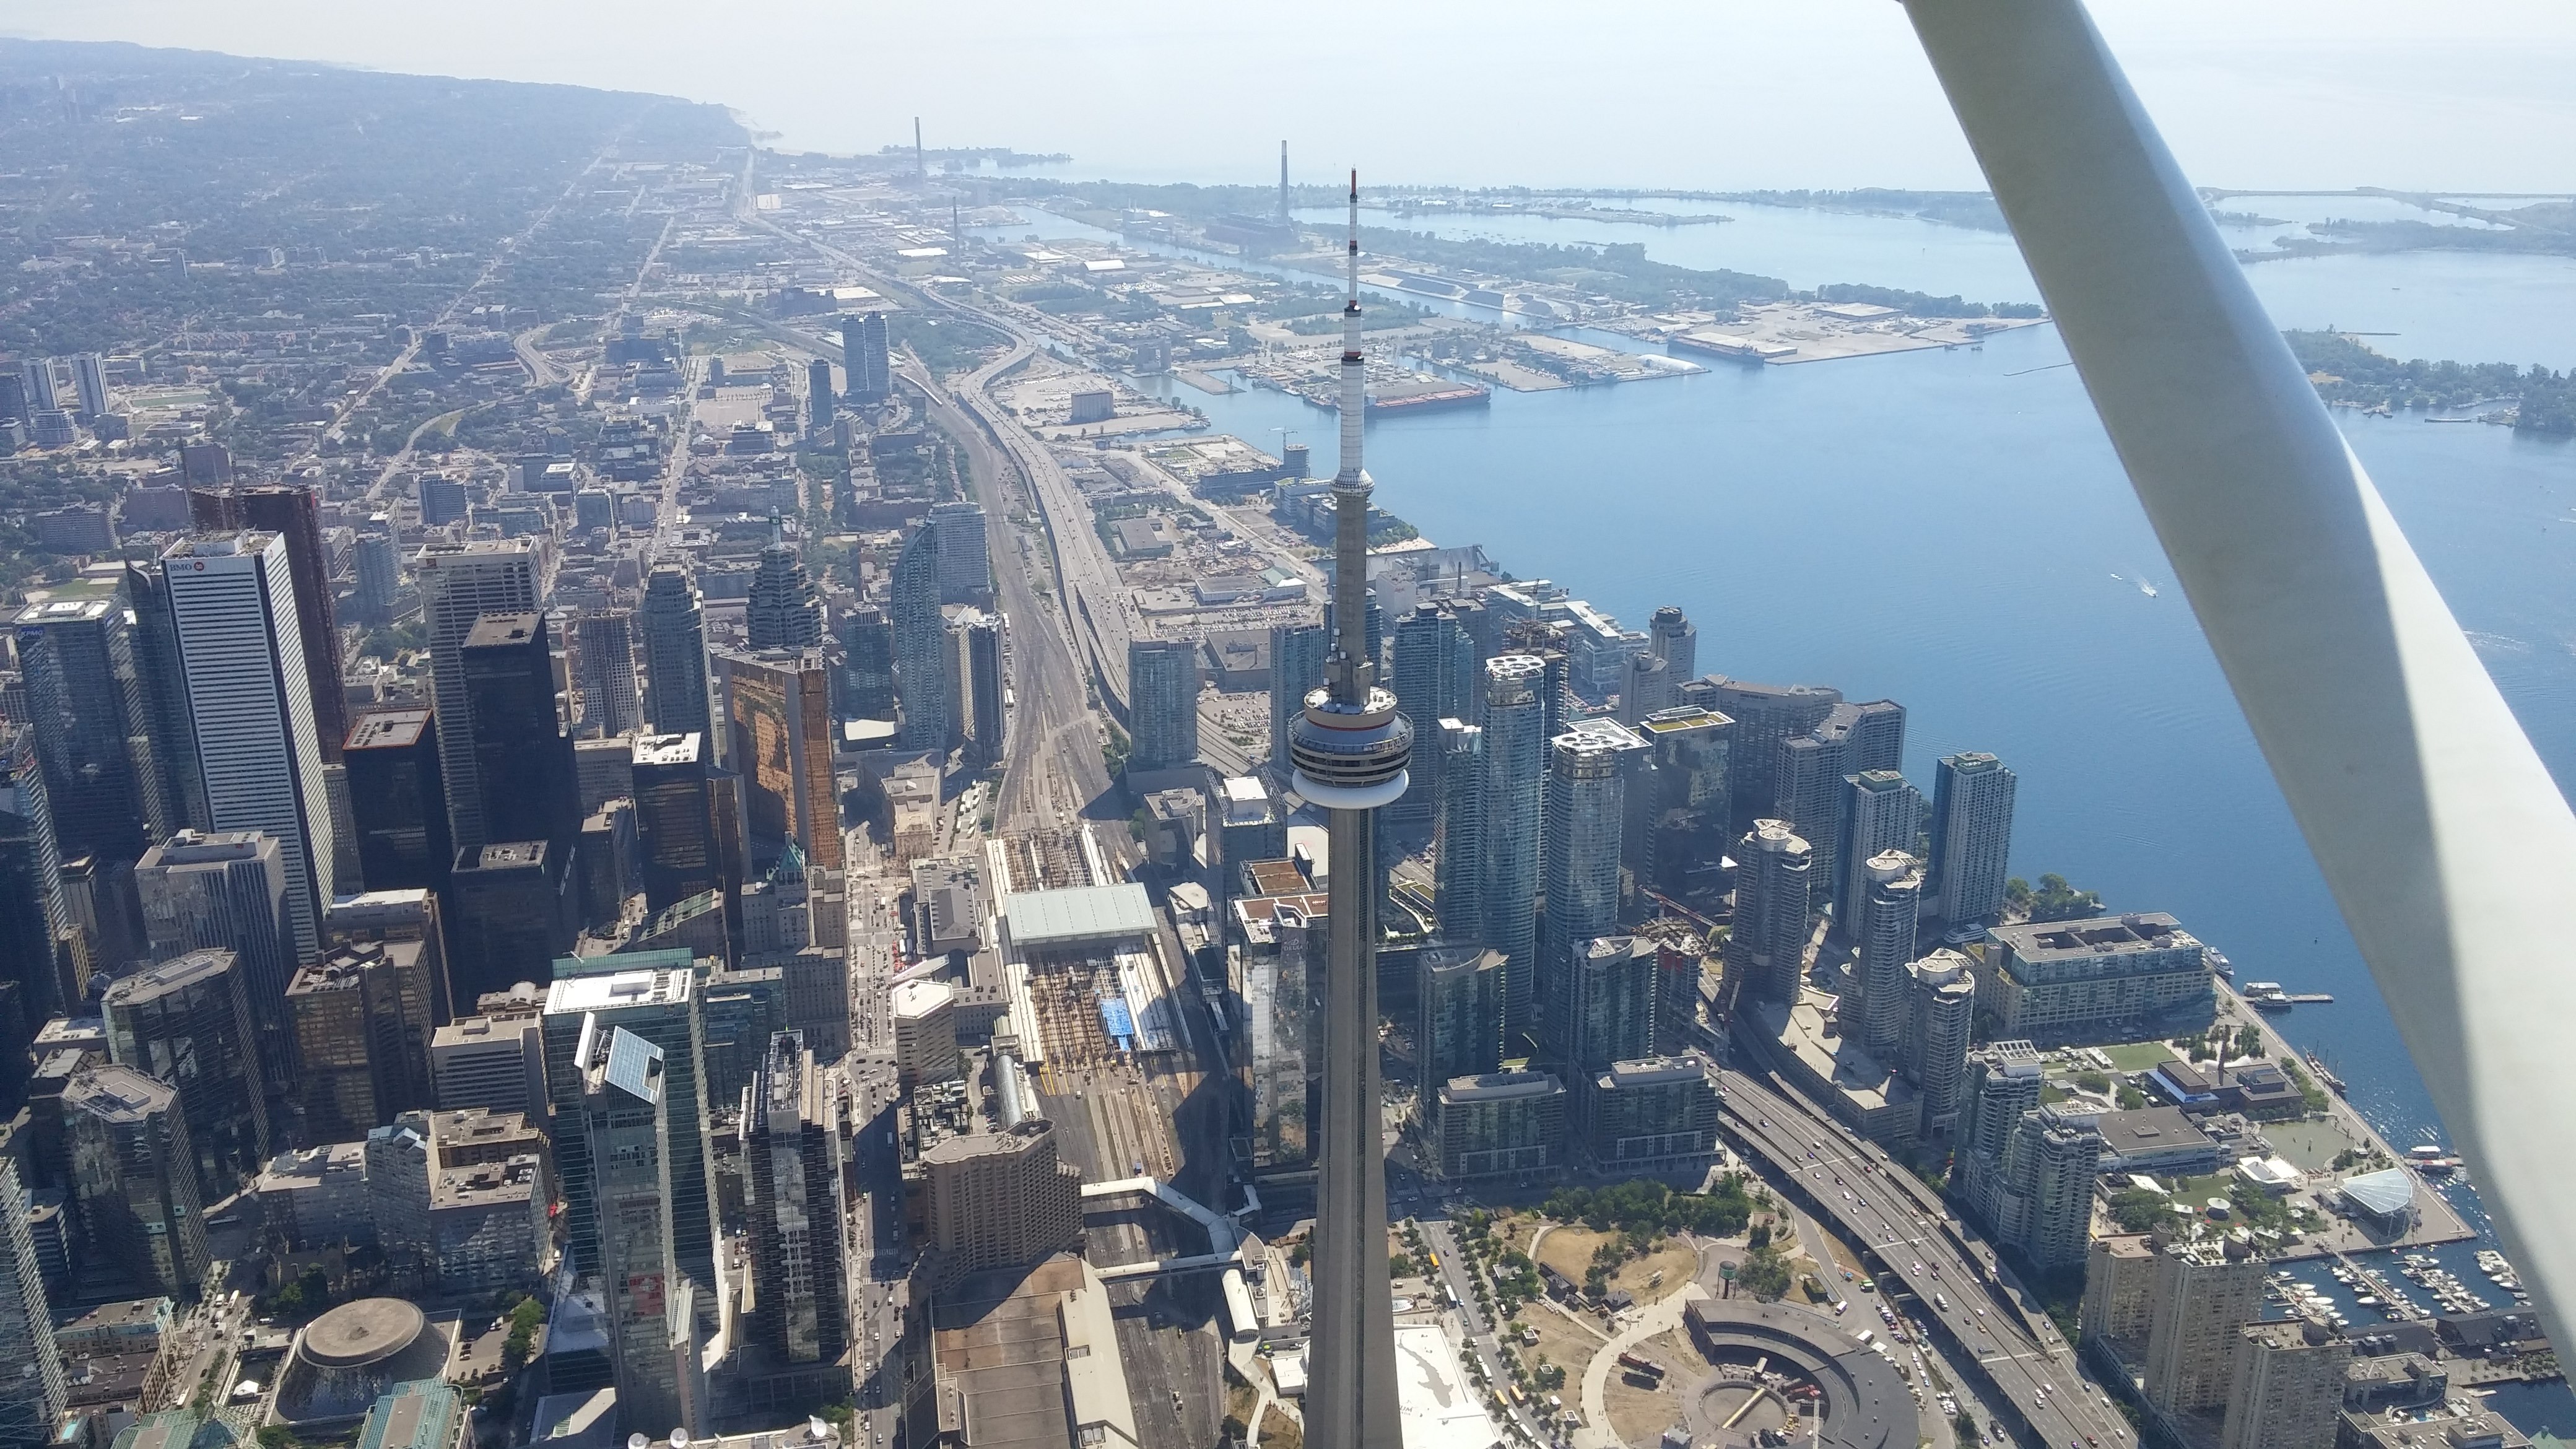 If you look closely, you can just make out people doing the “Edge Walk” on the CN Tower